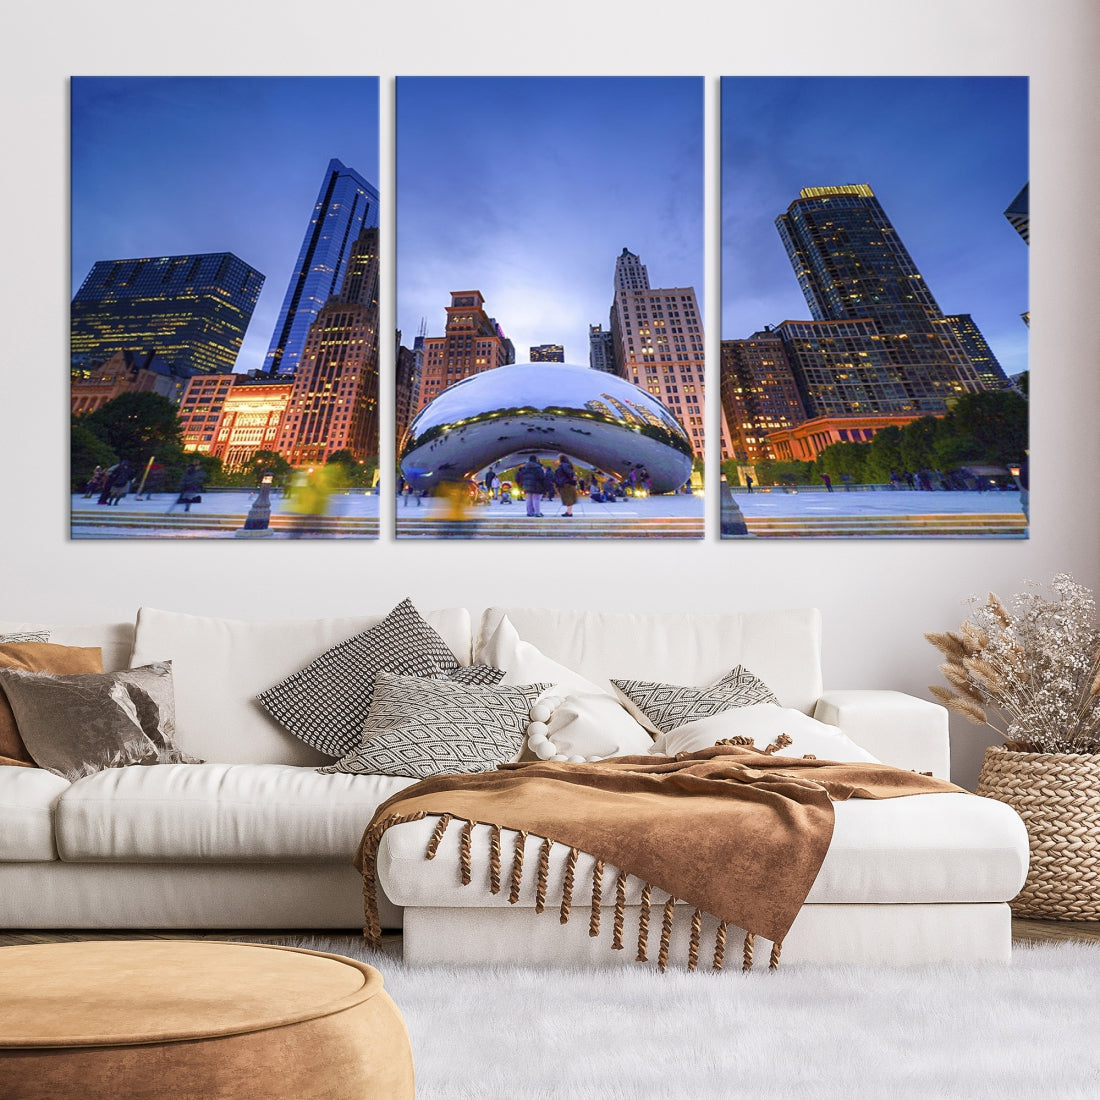 Chicago Night Skyline Wall Art Downtown Cityscape Canvas Picture Print Framed